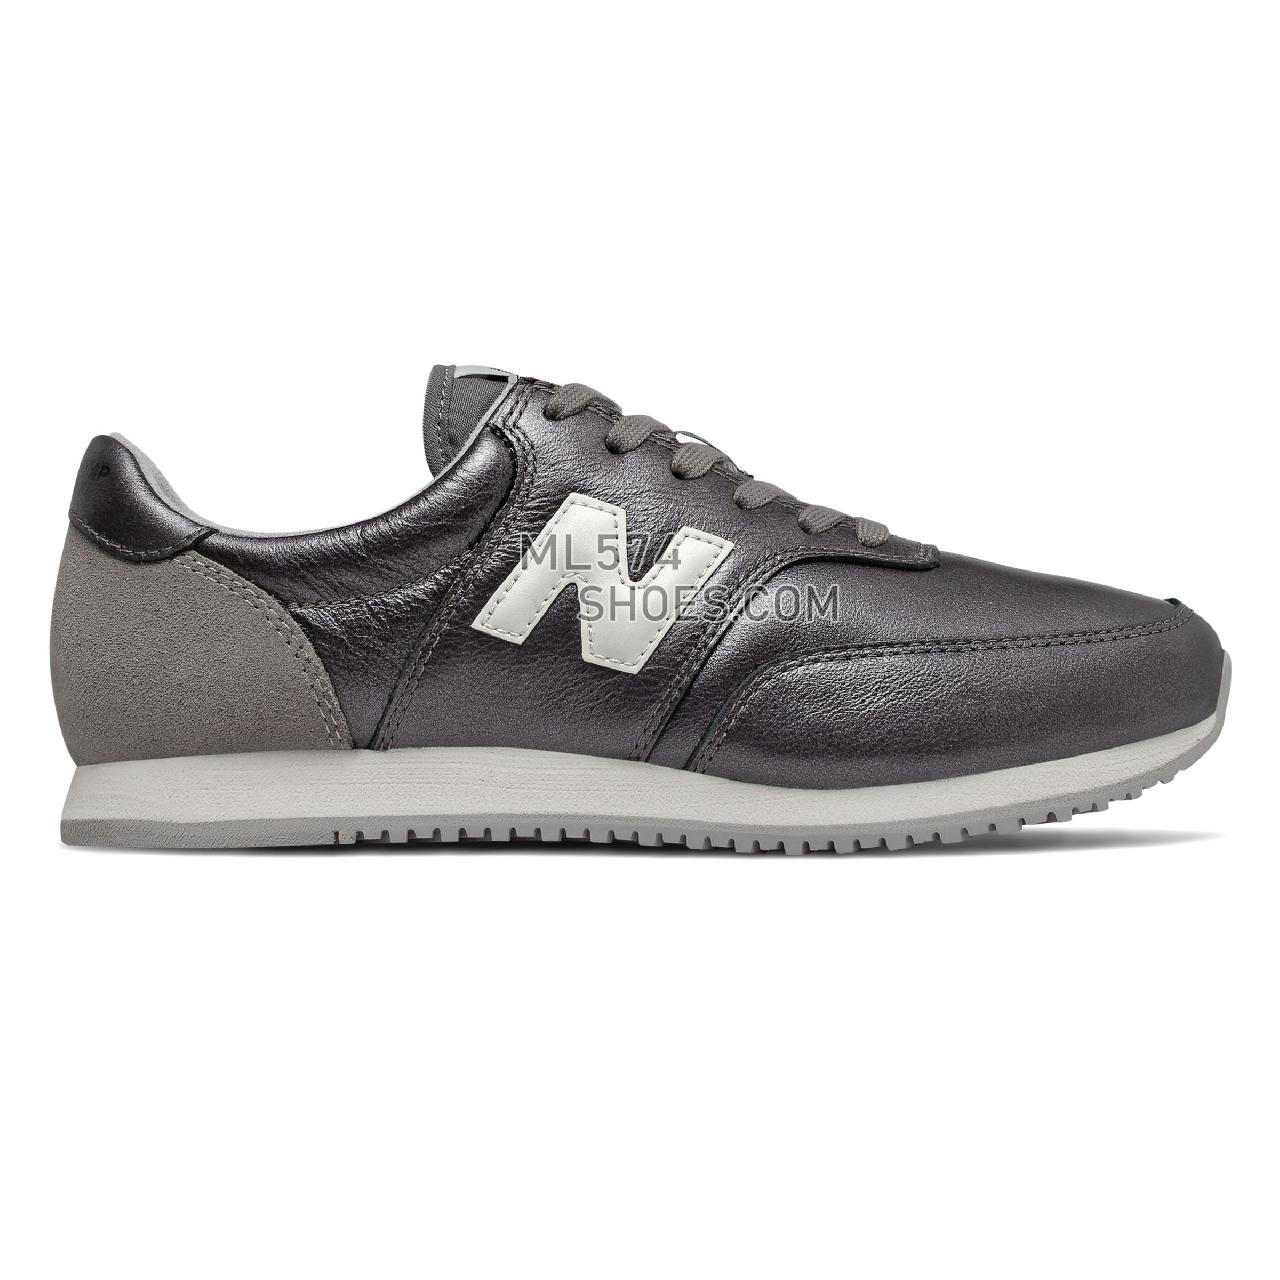 New Balance COMP 100 - Women's Whats Trending - Marblehead with Black - WLC100AU